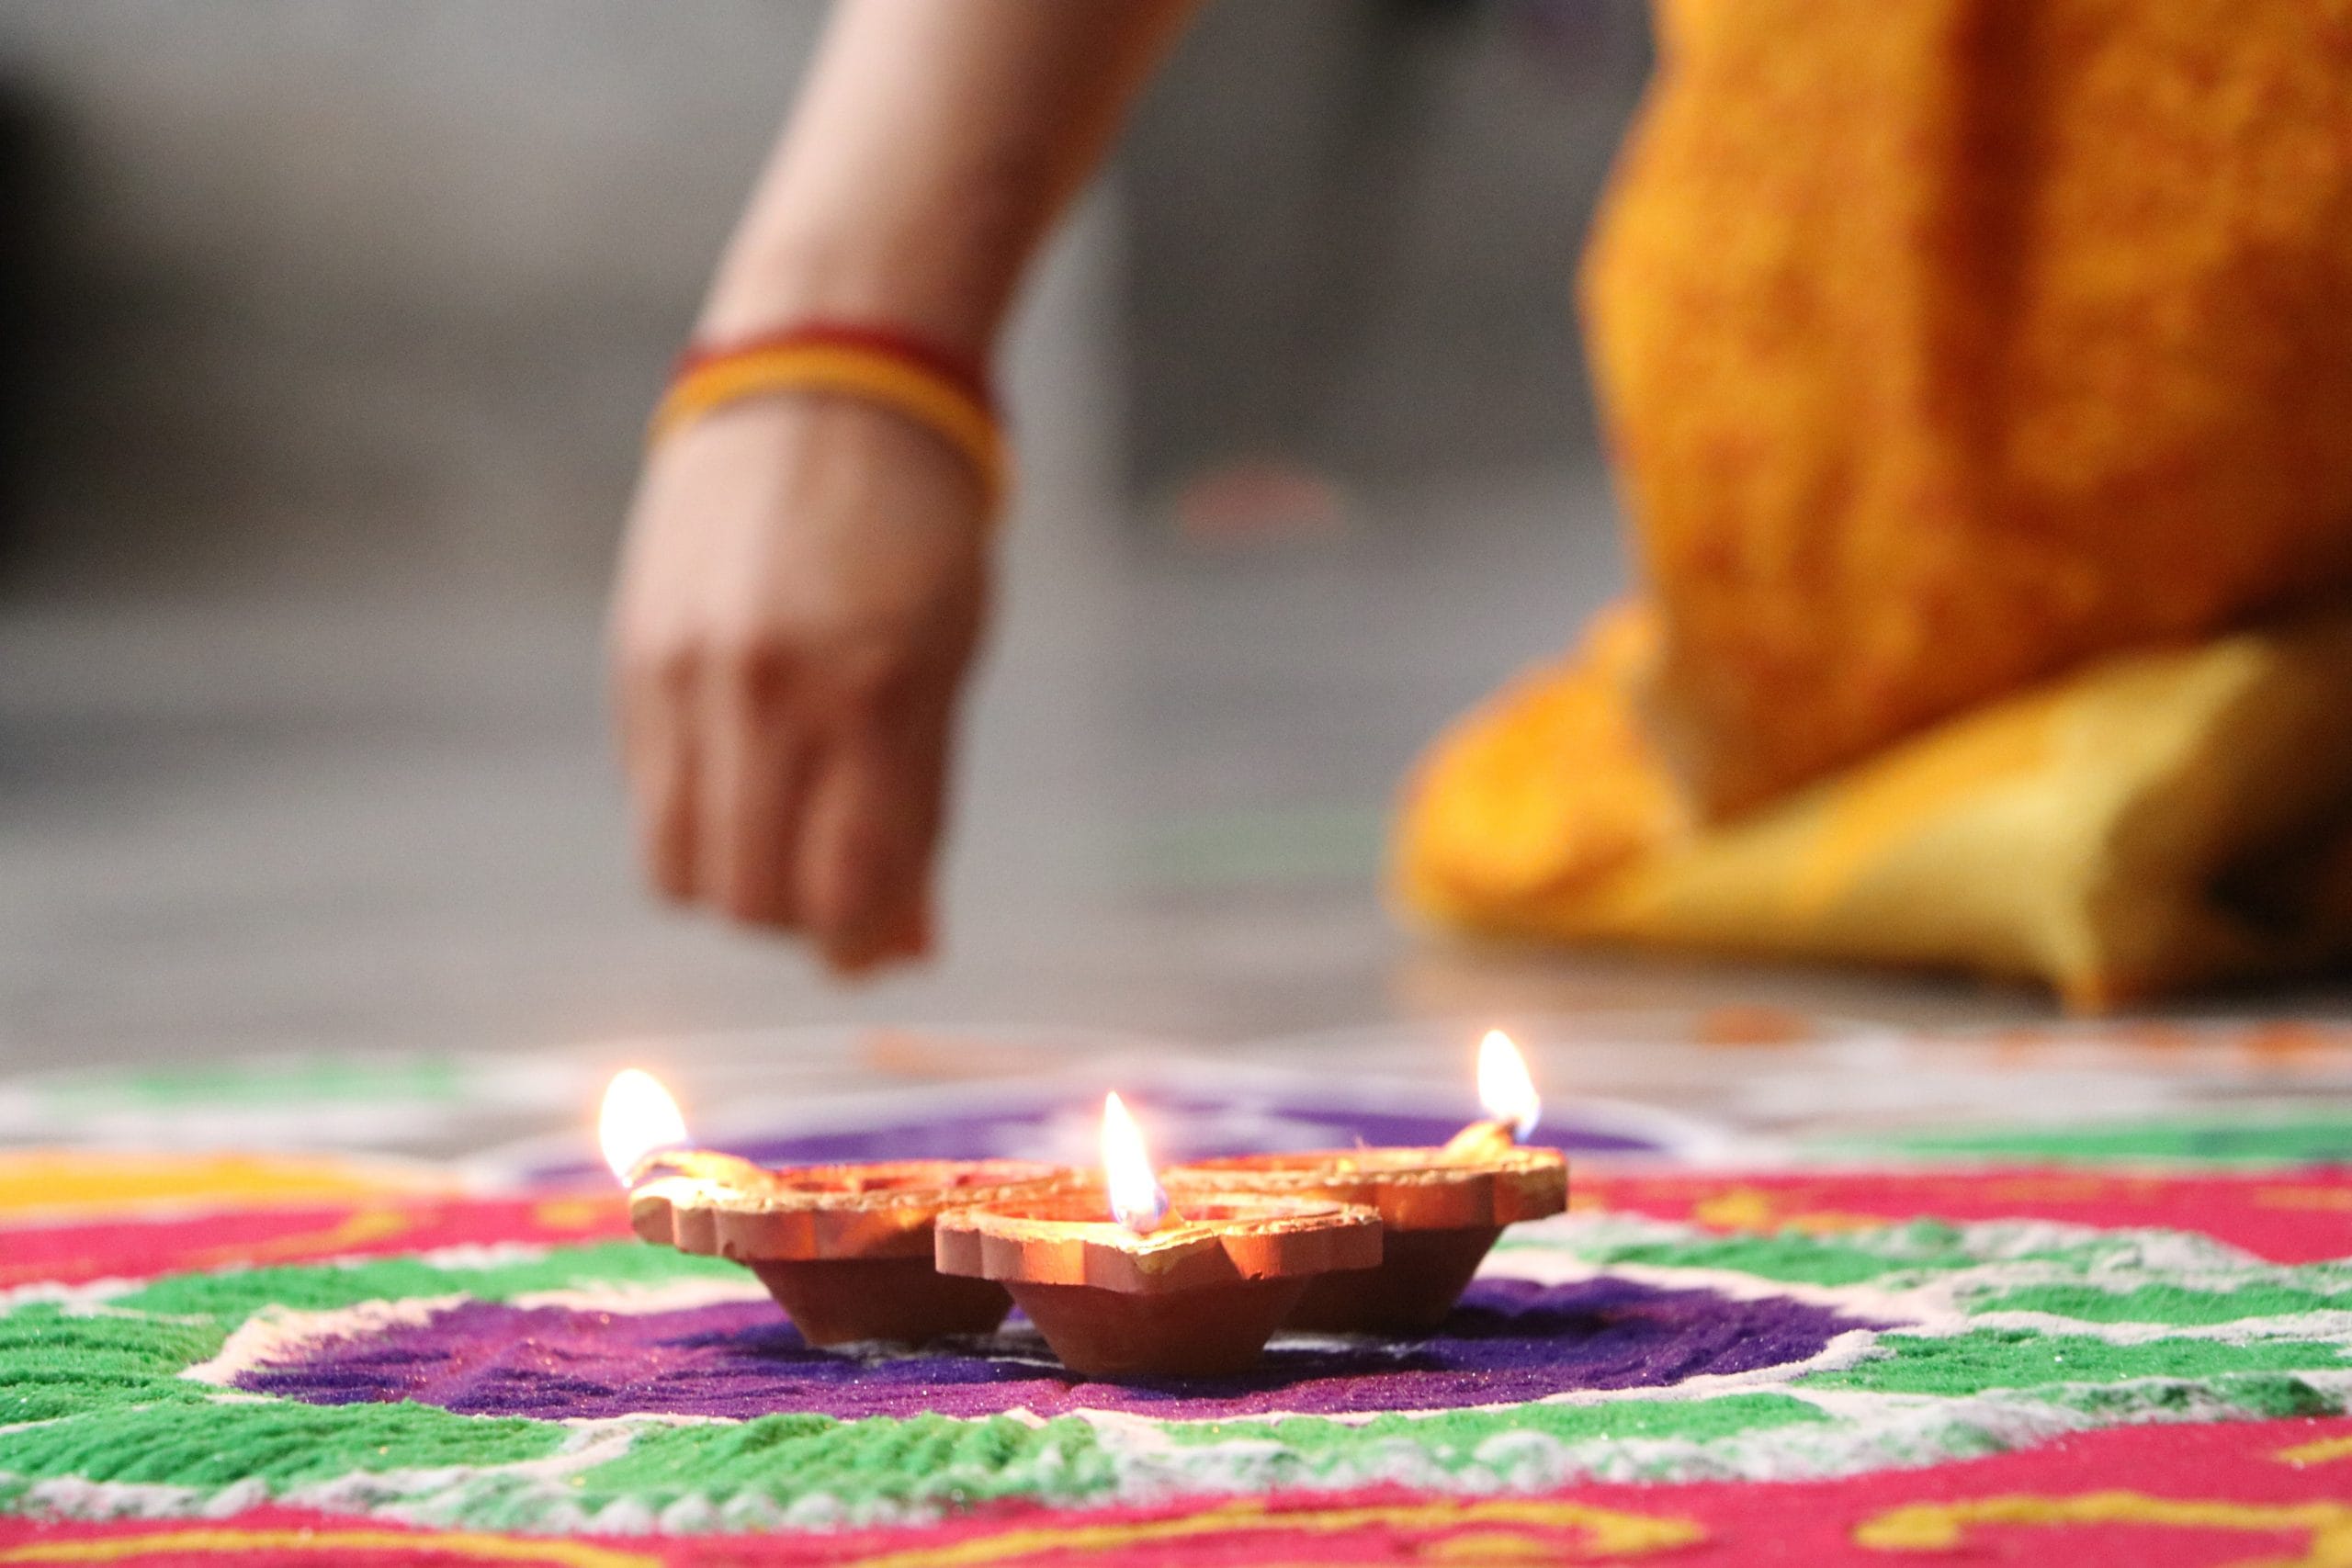 Which Hindu month is Diwali observed in?